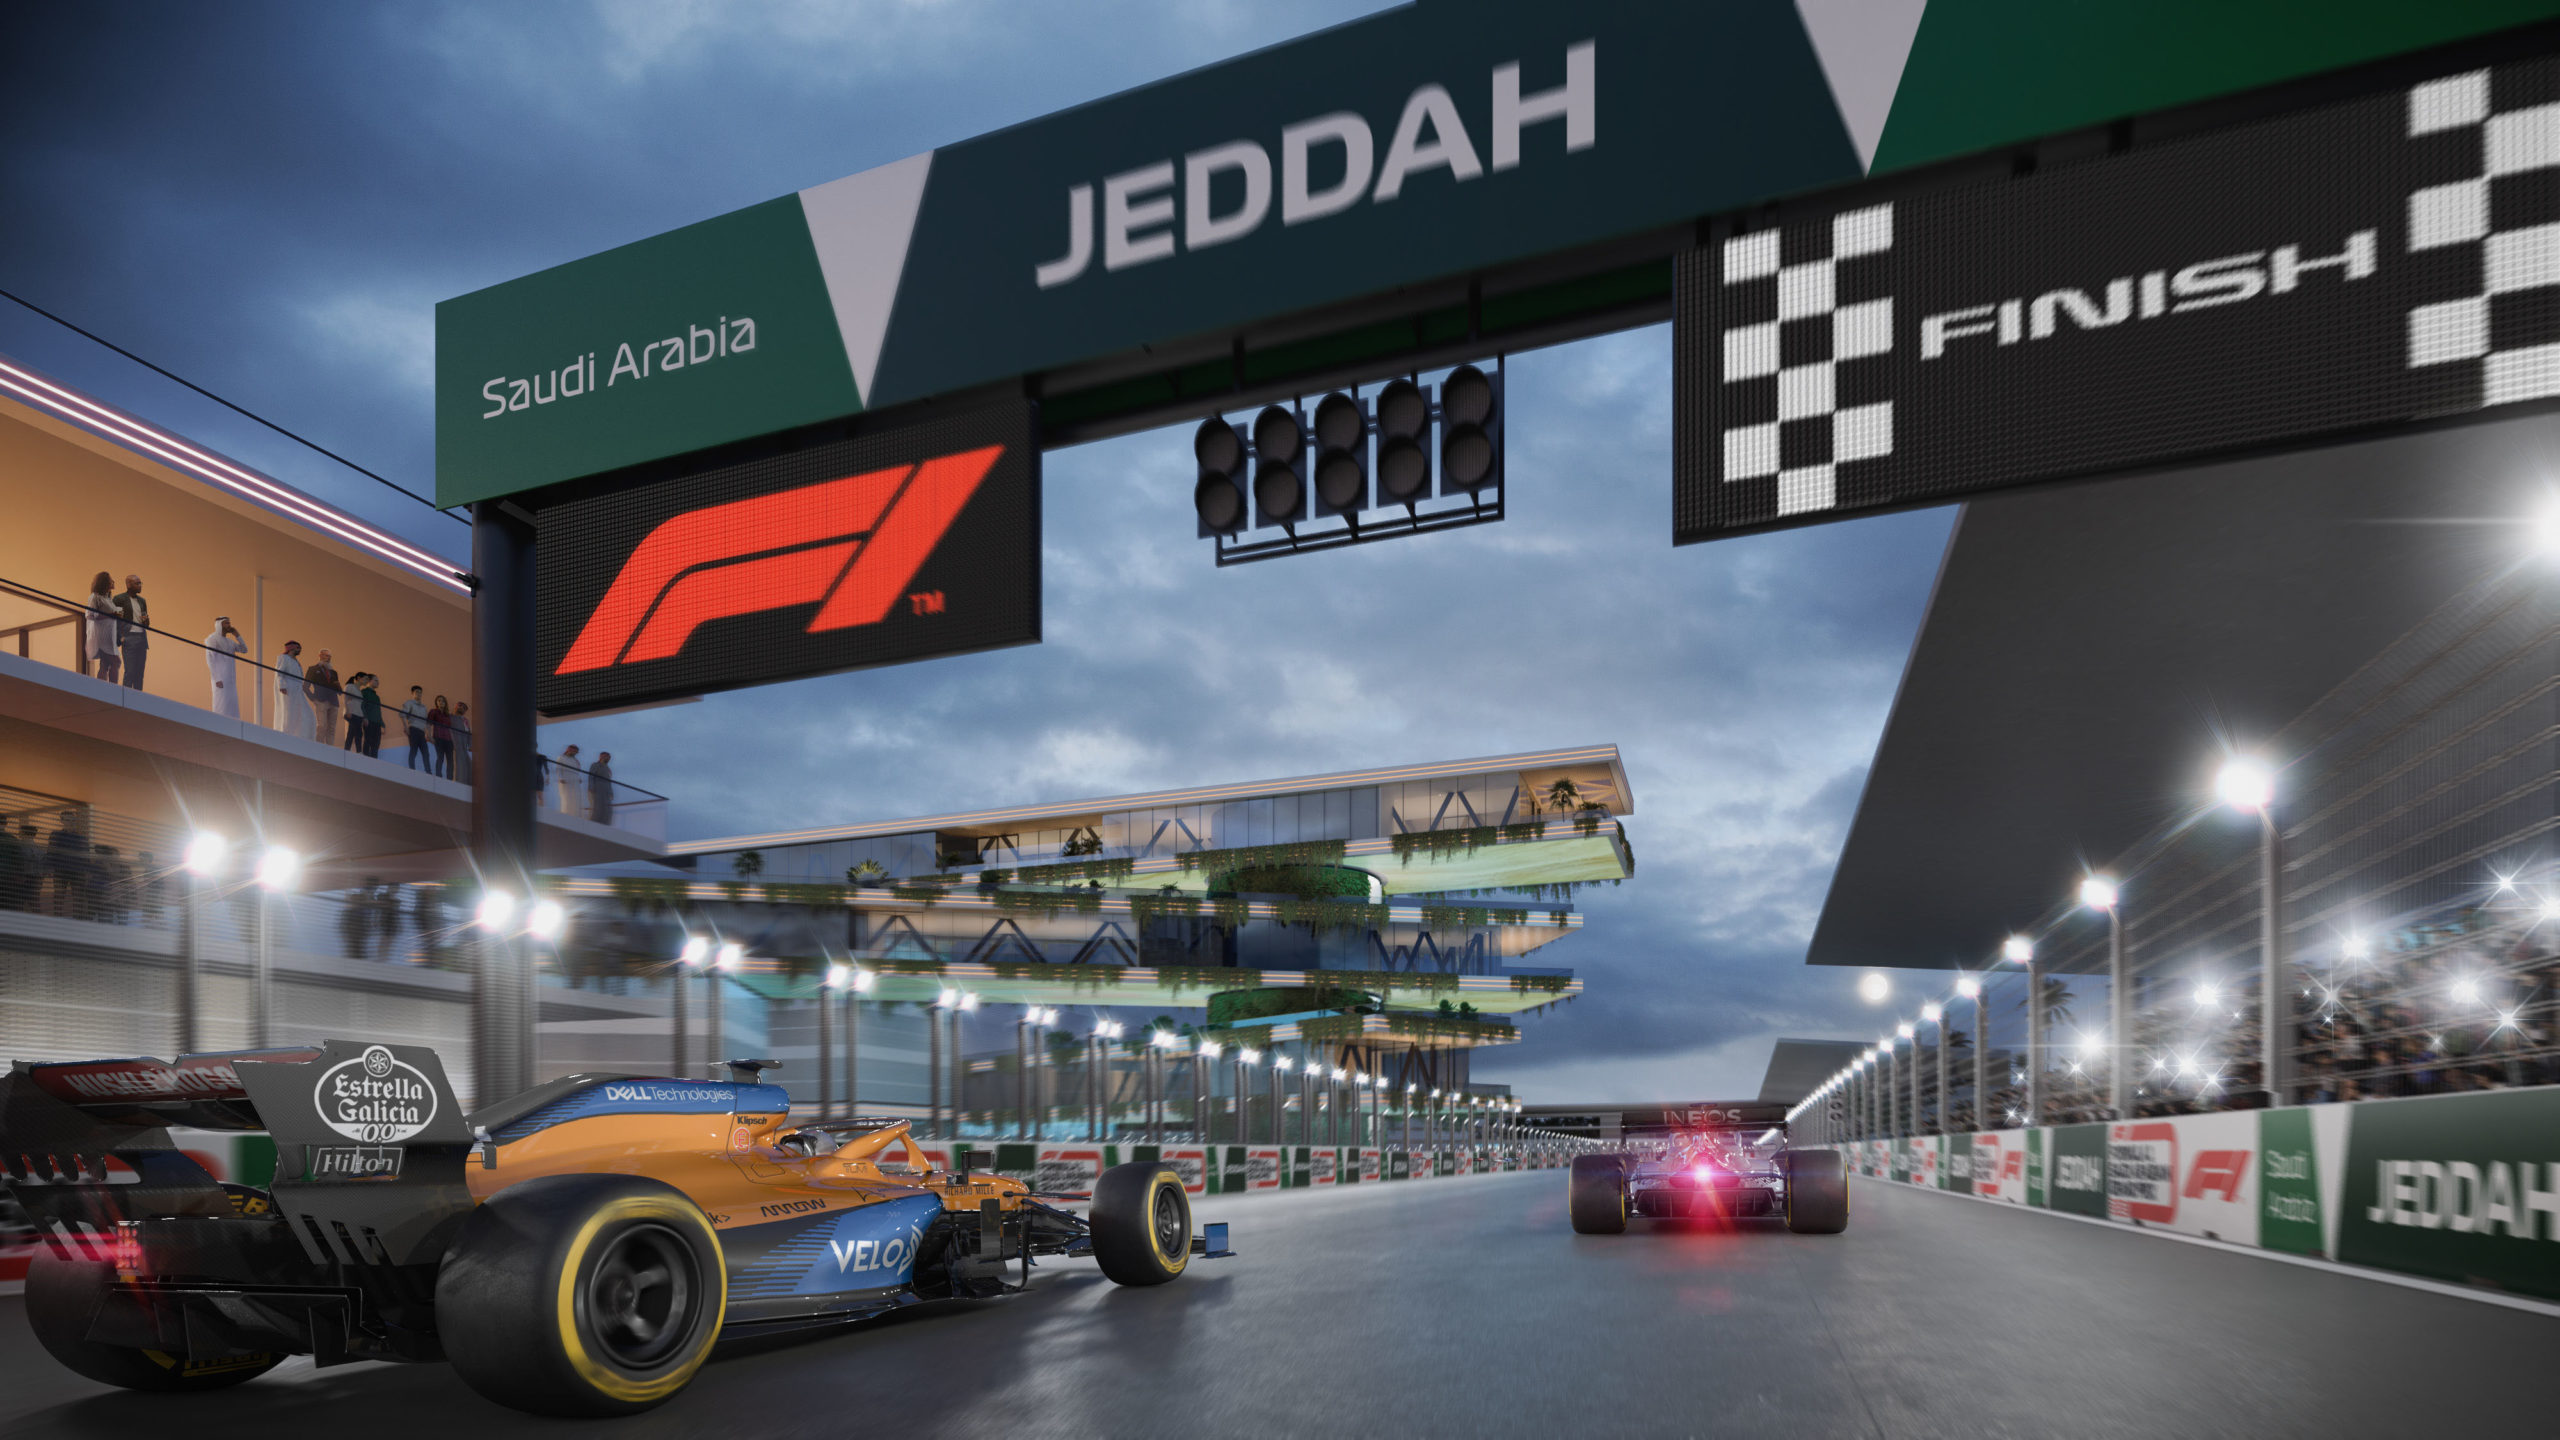 F1 and Saudi Arabia release details of Jeddah Circuit which will be the 'fastest ever street circuit'